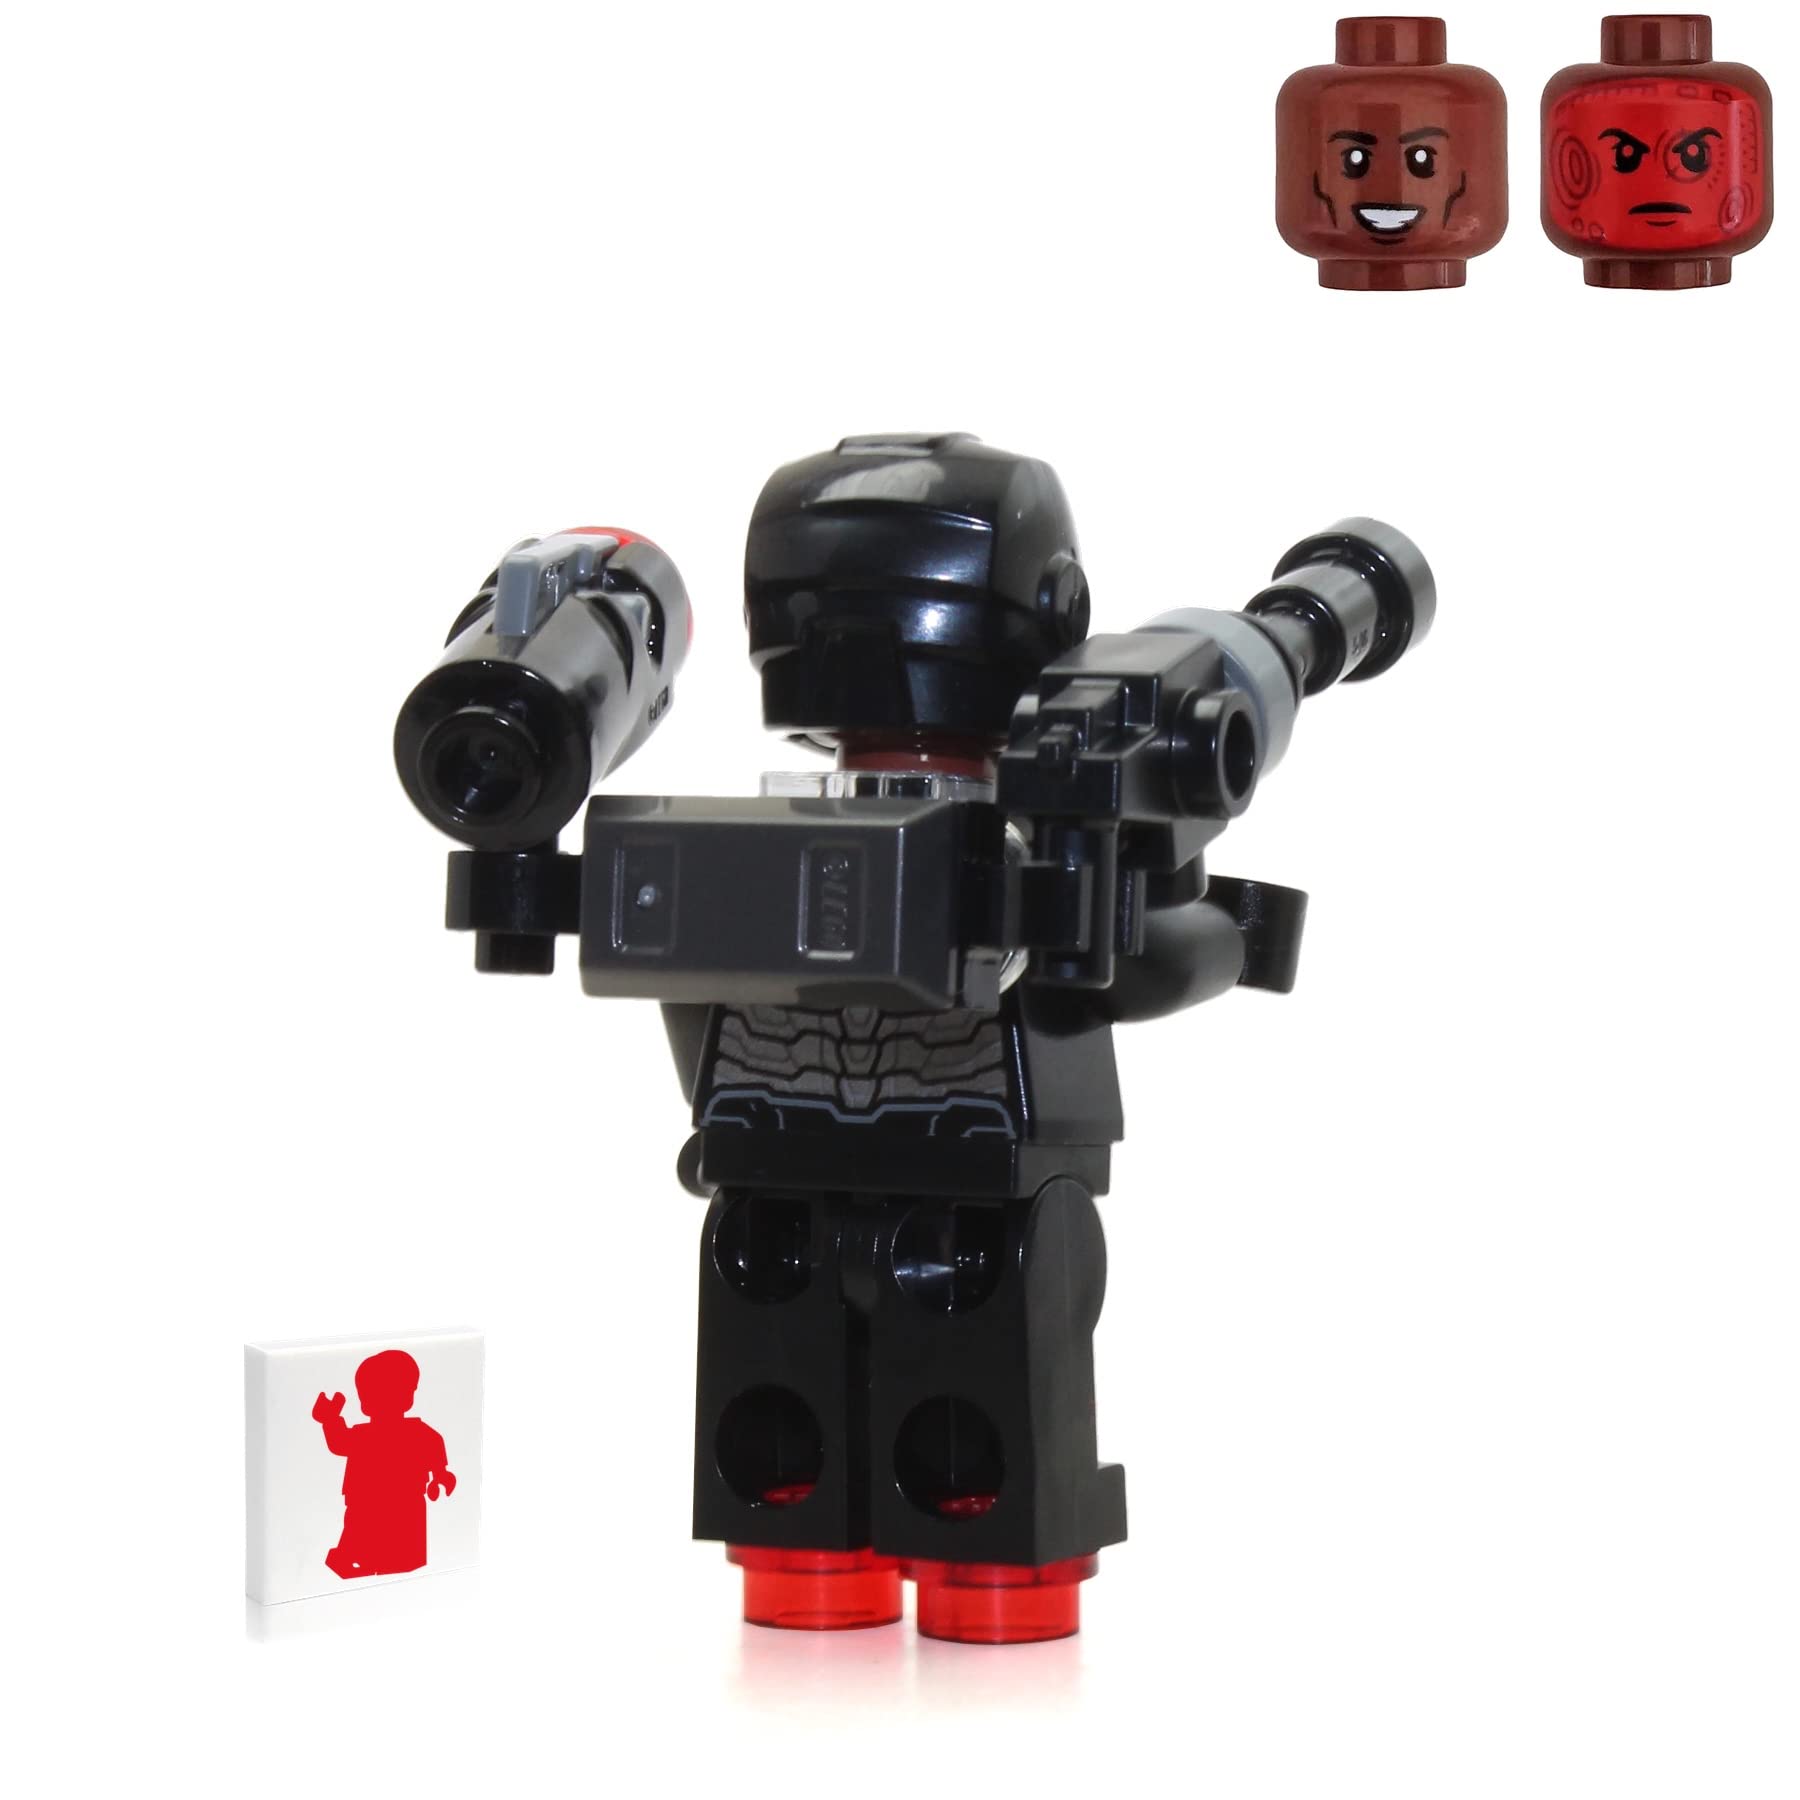 LEGO Marvel Super Heroes Avengers Infinity War Minifigure - War Machine with Blasters Foil Pack